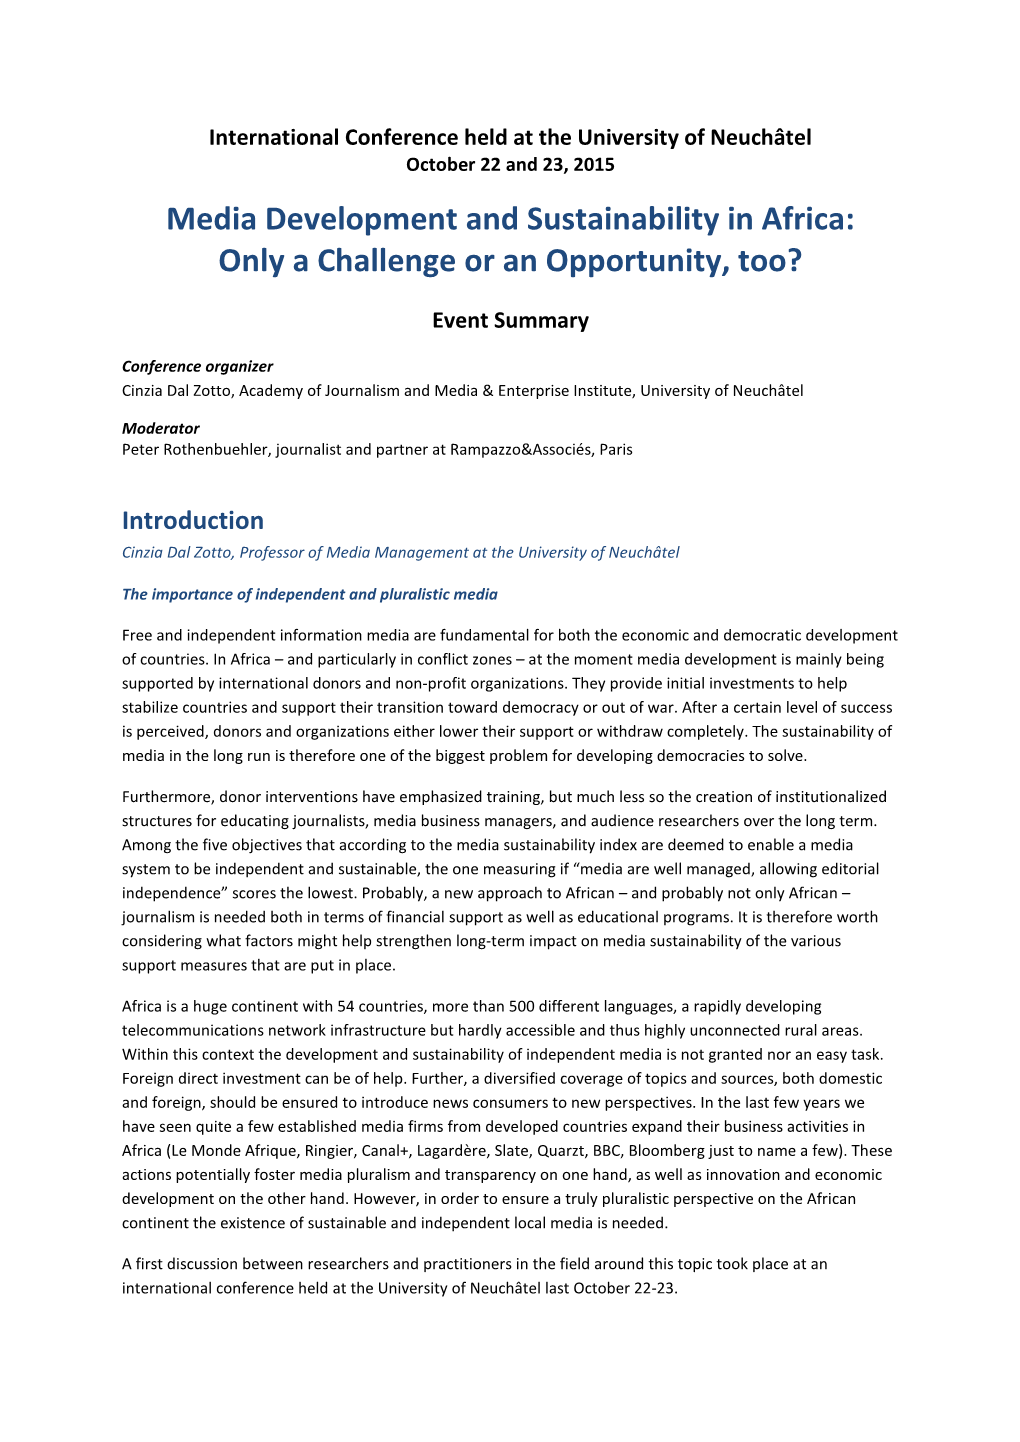 Media Development and Sustainability in Africa: Only a Challenge Or an Opportunity, Too?